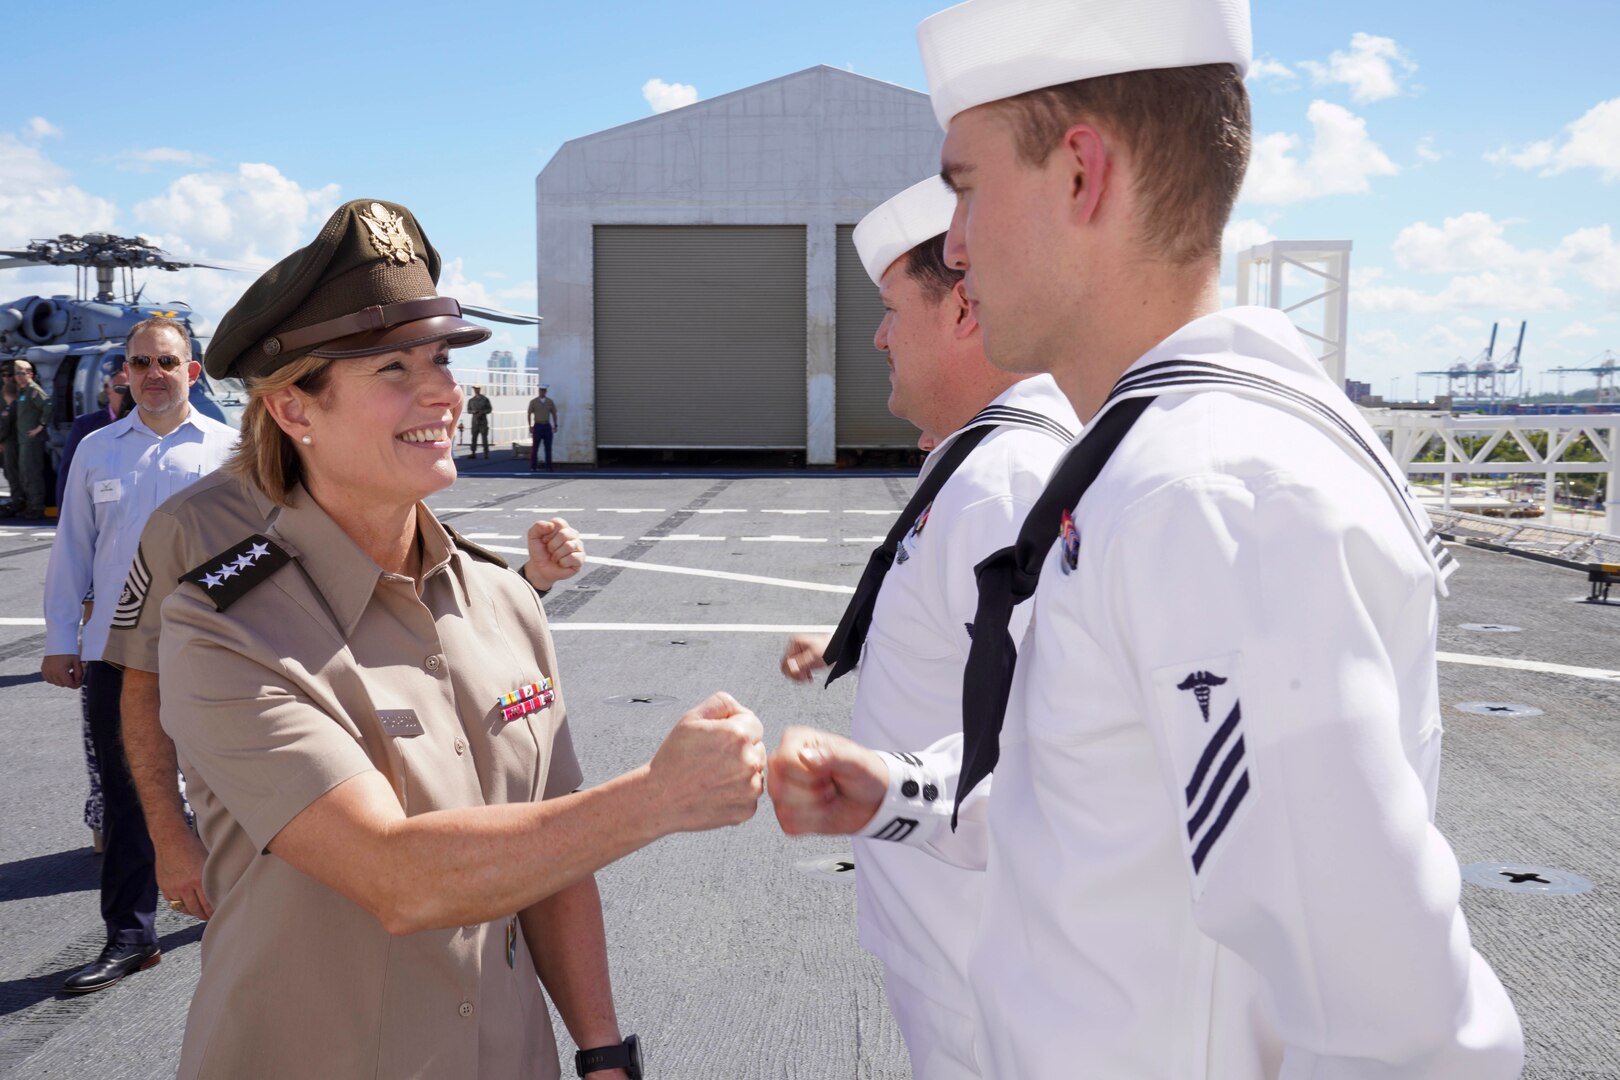 Army Gen. Laura Richardson, commander of U.S. Southern Command, greets crew members of hospital ship USNS Comfort.